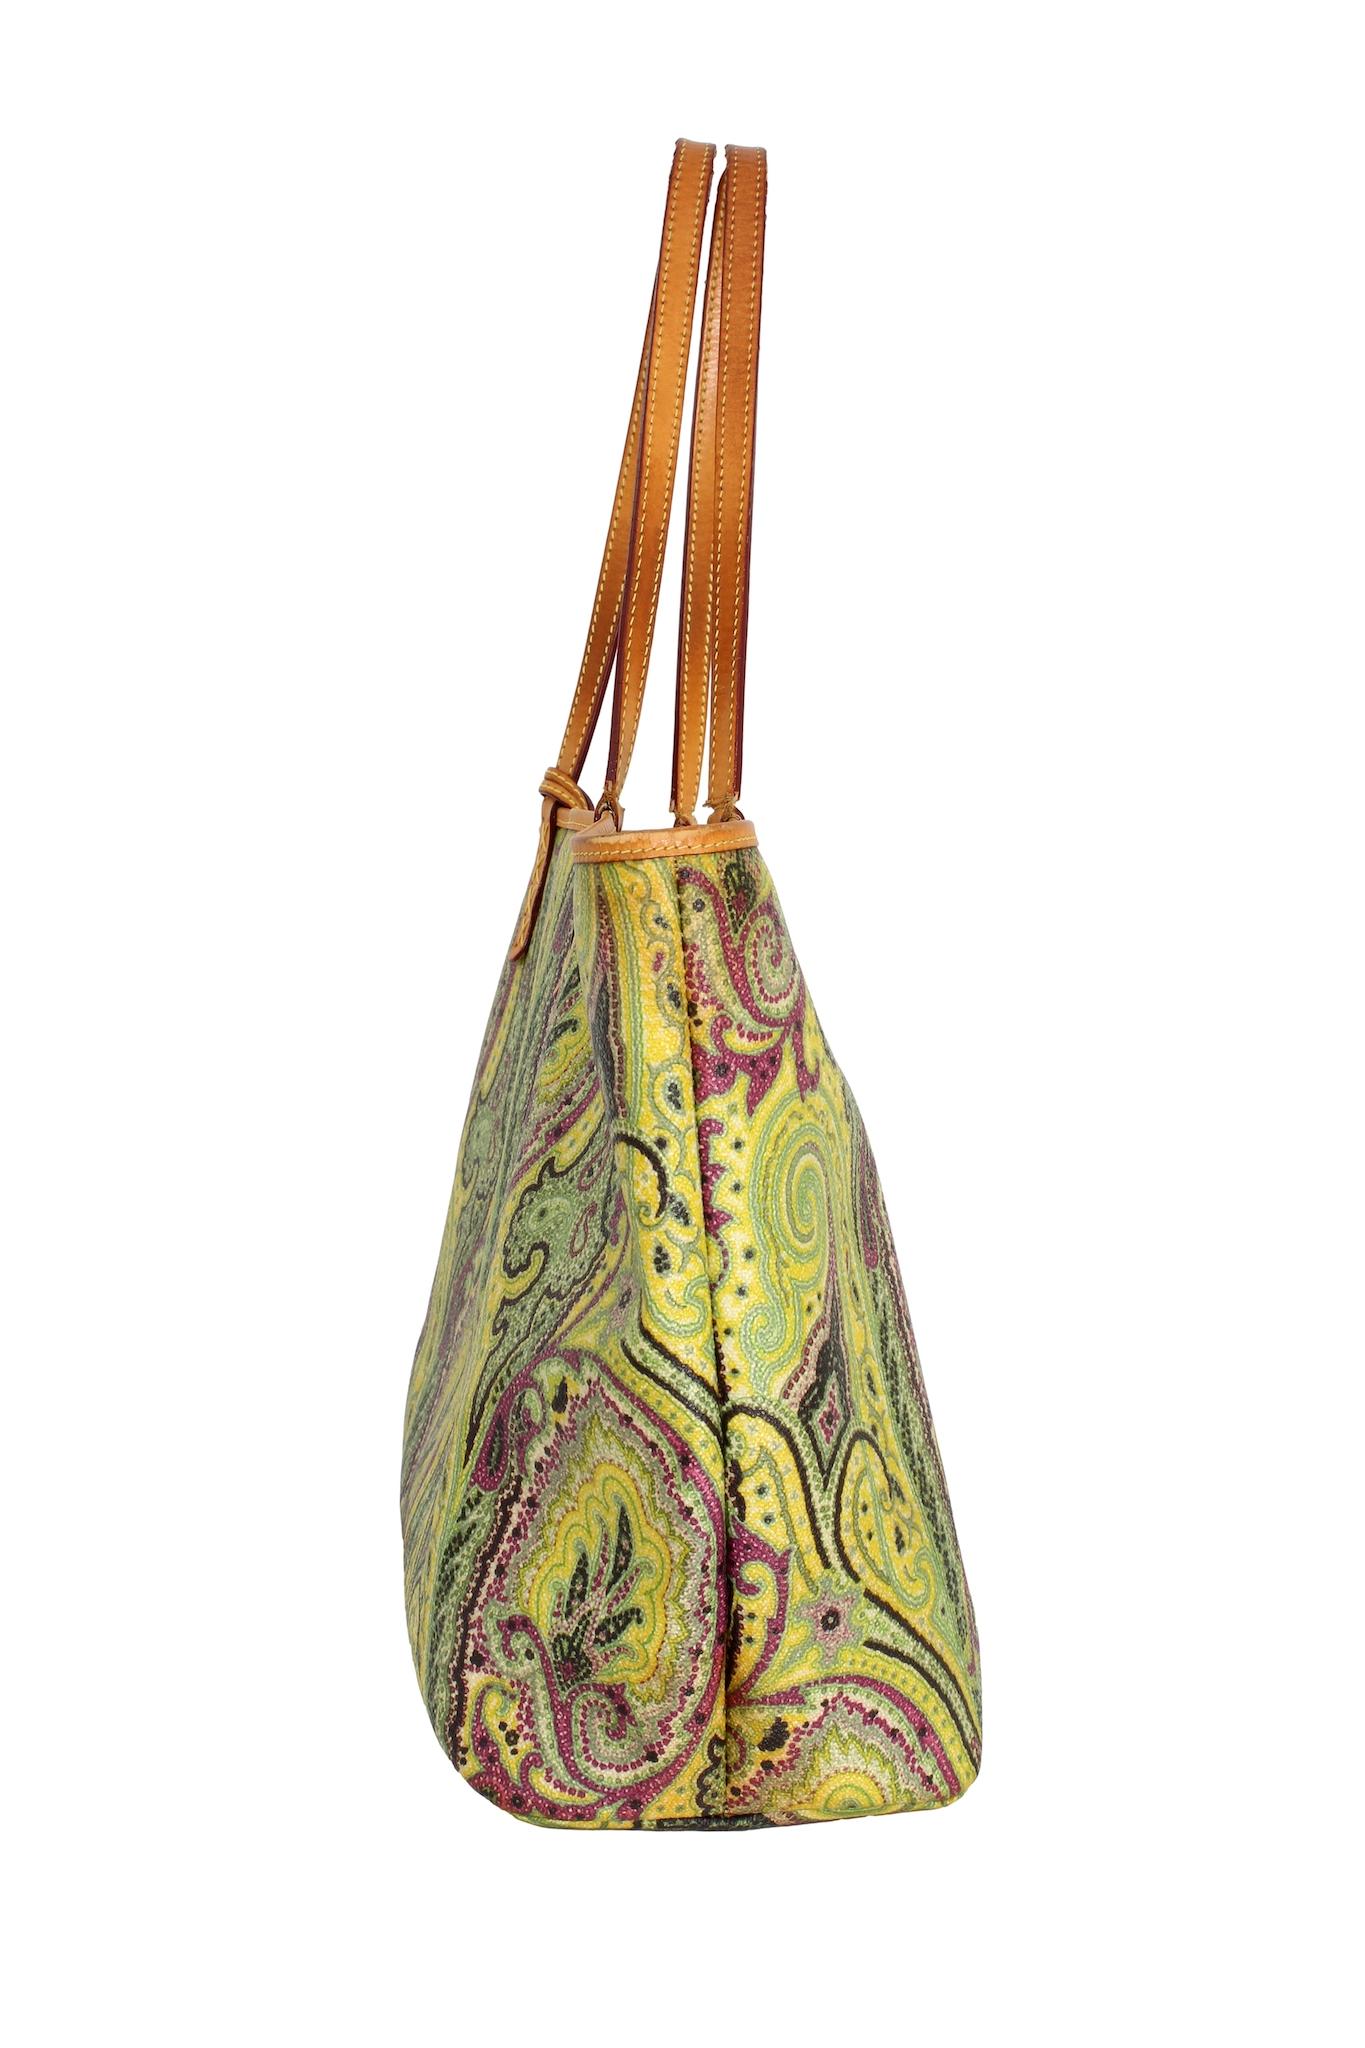 Etro Green Canvas Paisley Tote Bag 2010s 2